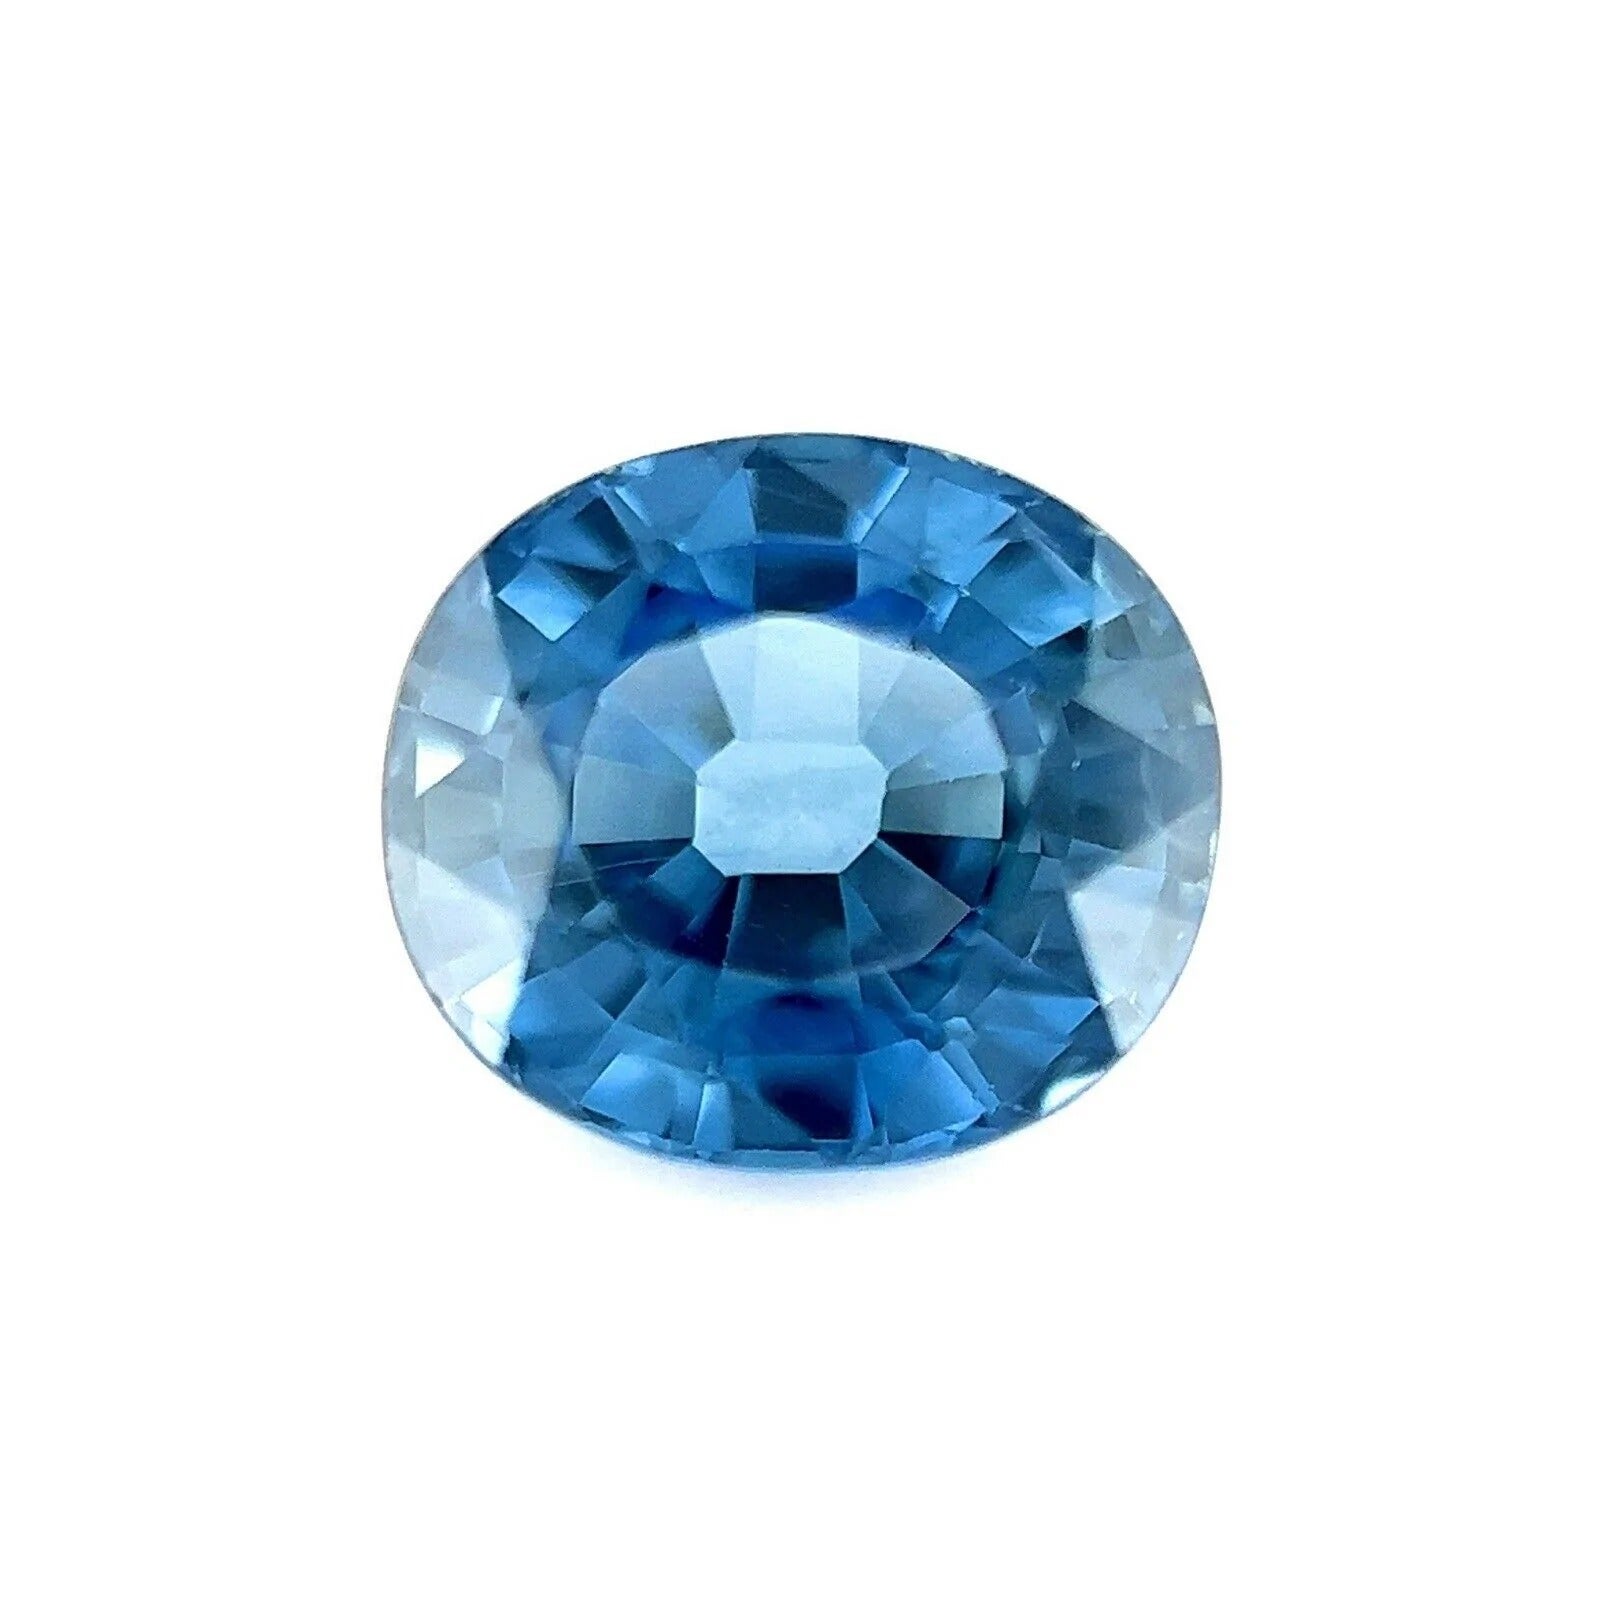 1.82ct AIG Certified Vivid Blue Sapphire Oval Cut Rare Loose Gemstone For Sale